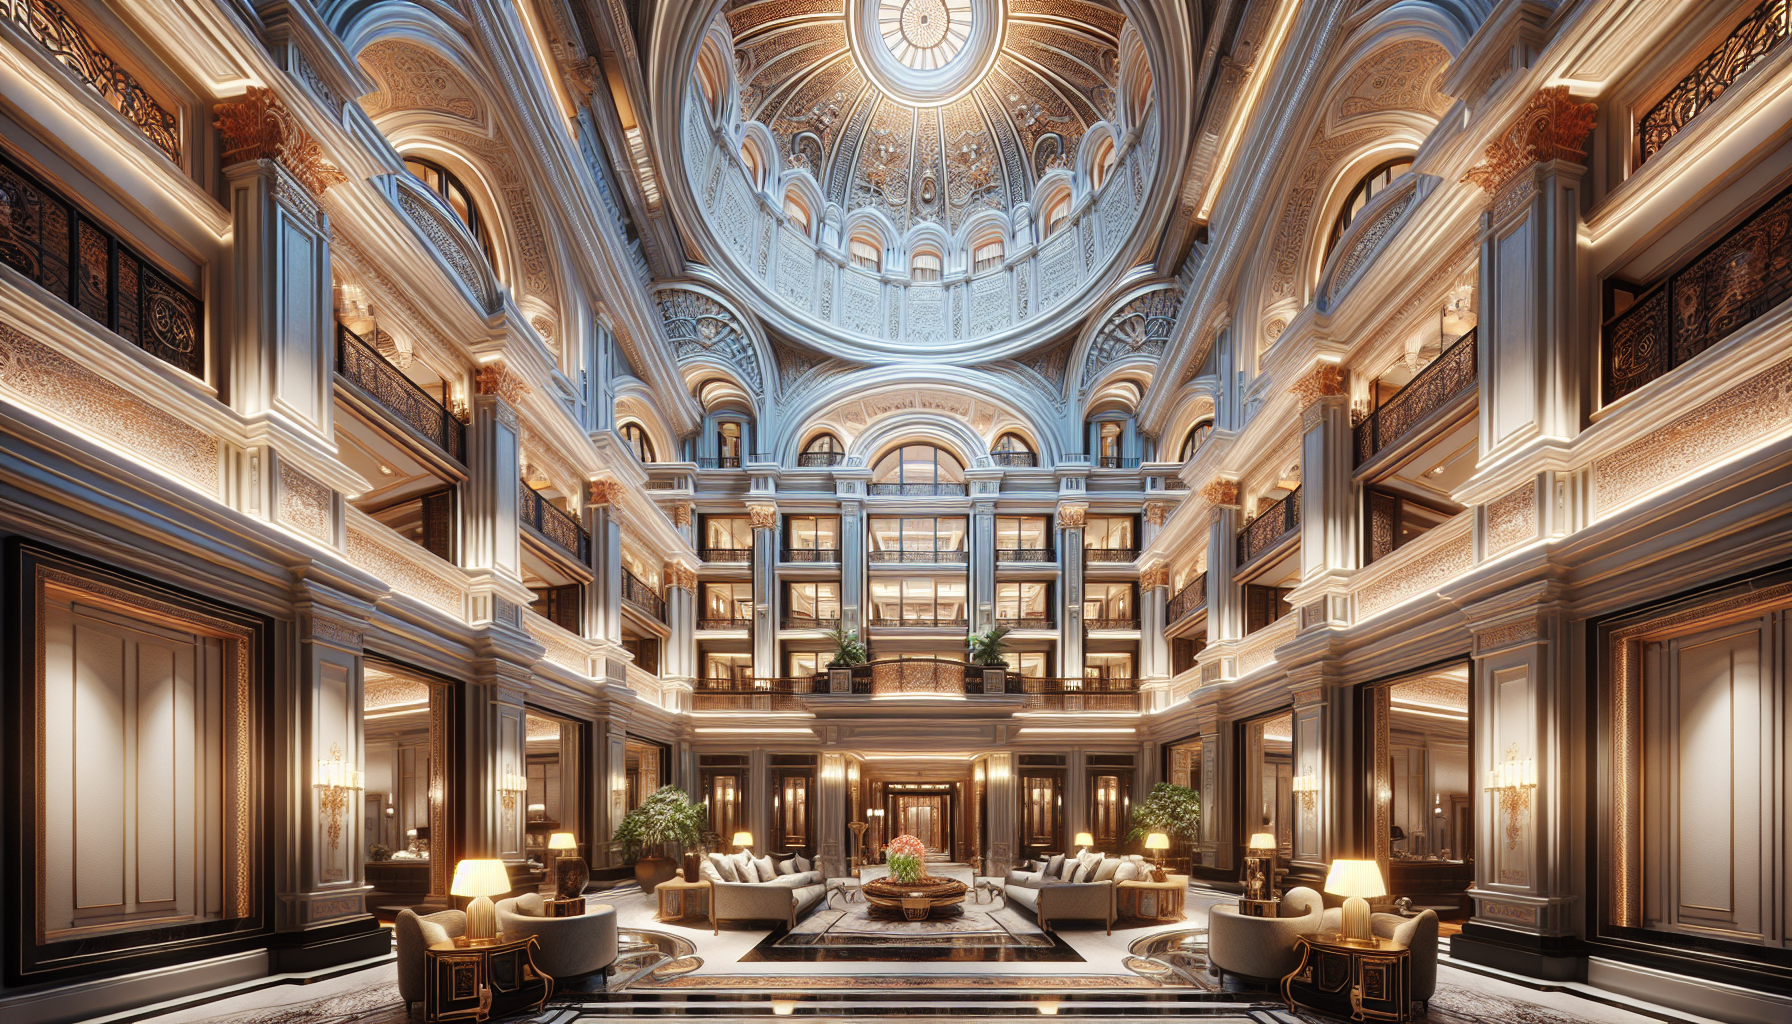 Is Marriott The Biggest Hotel In The World?